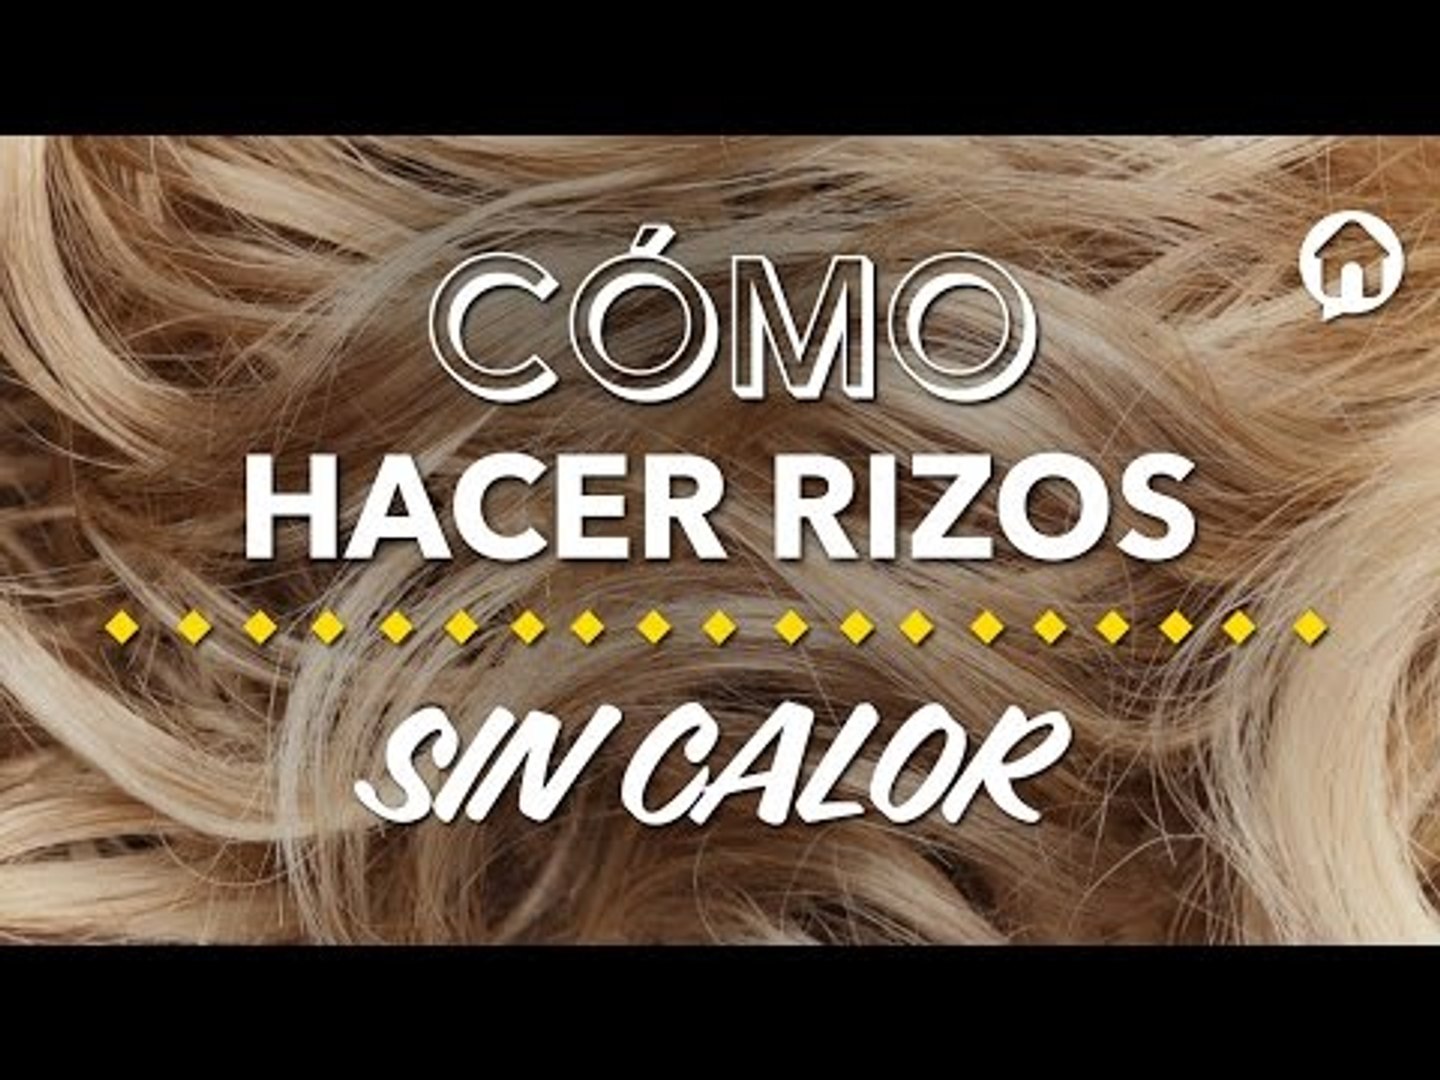 Cómo hacer rizos sin calor | How to curl hair without heat | Kiwilimón -  Vídeo Dailymotion